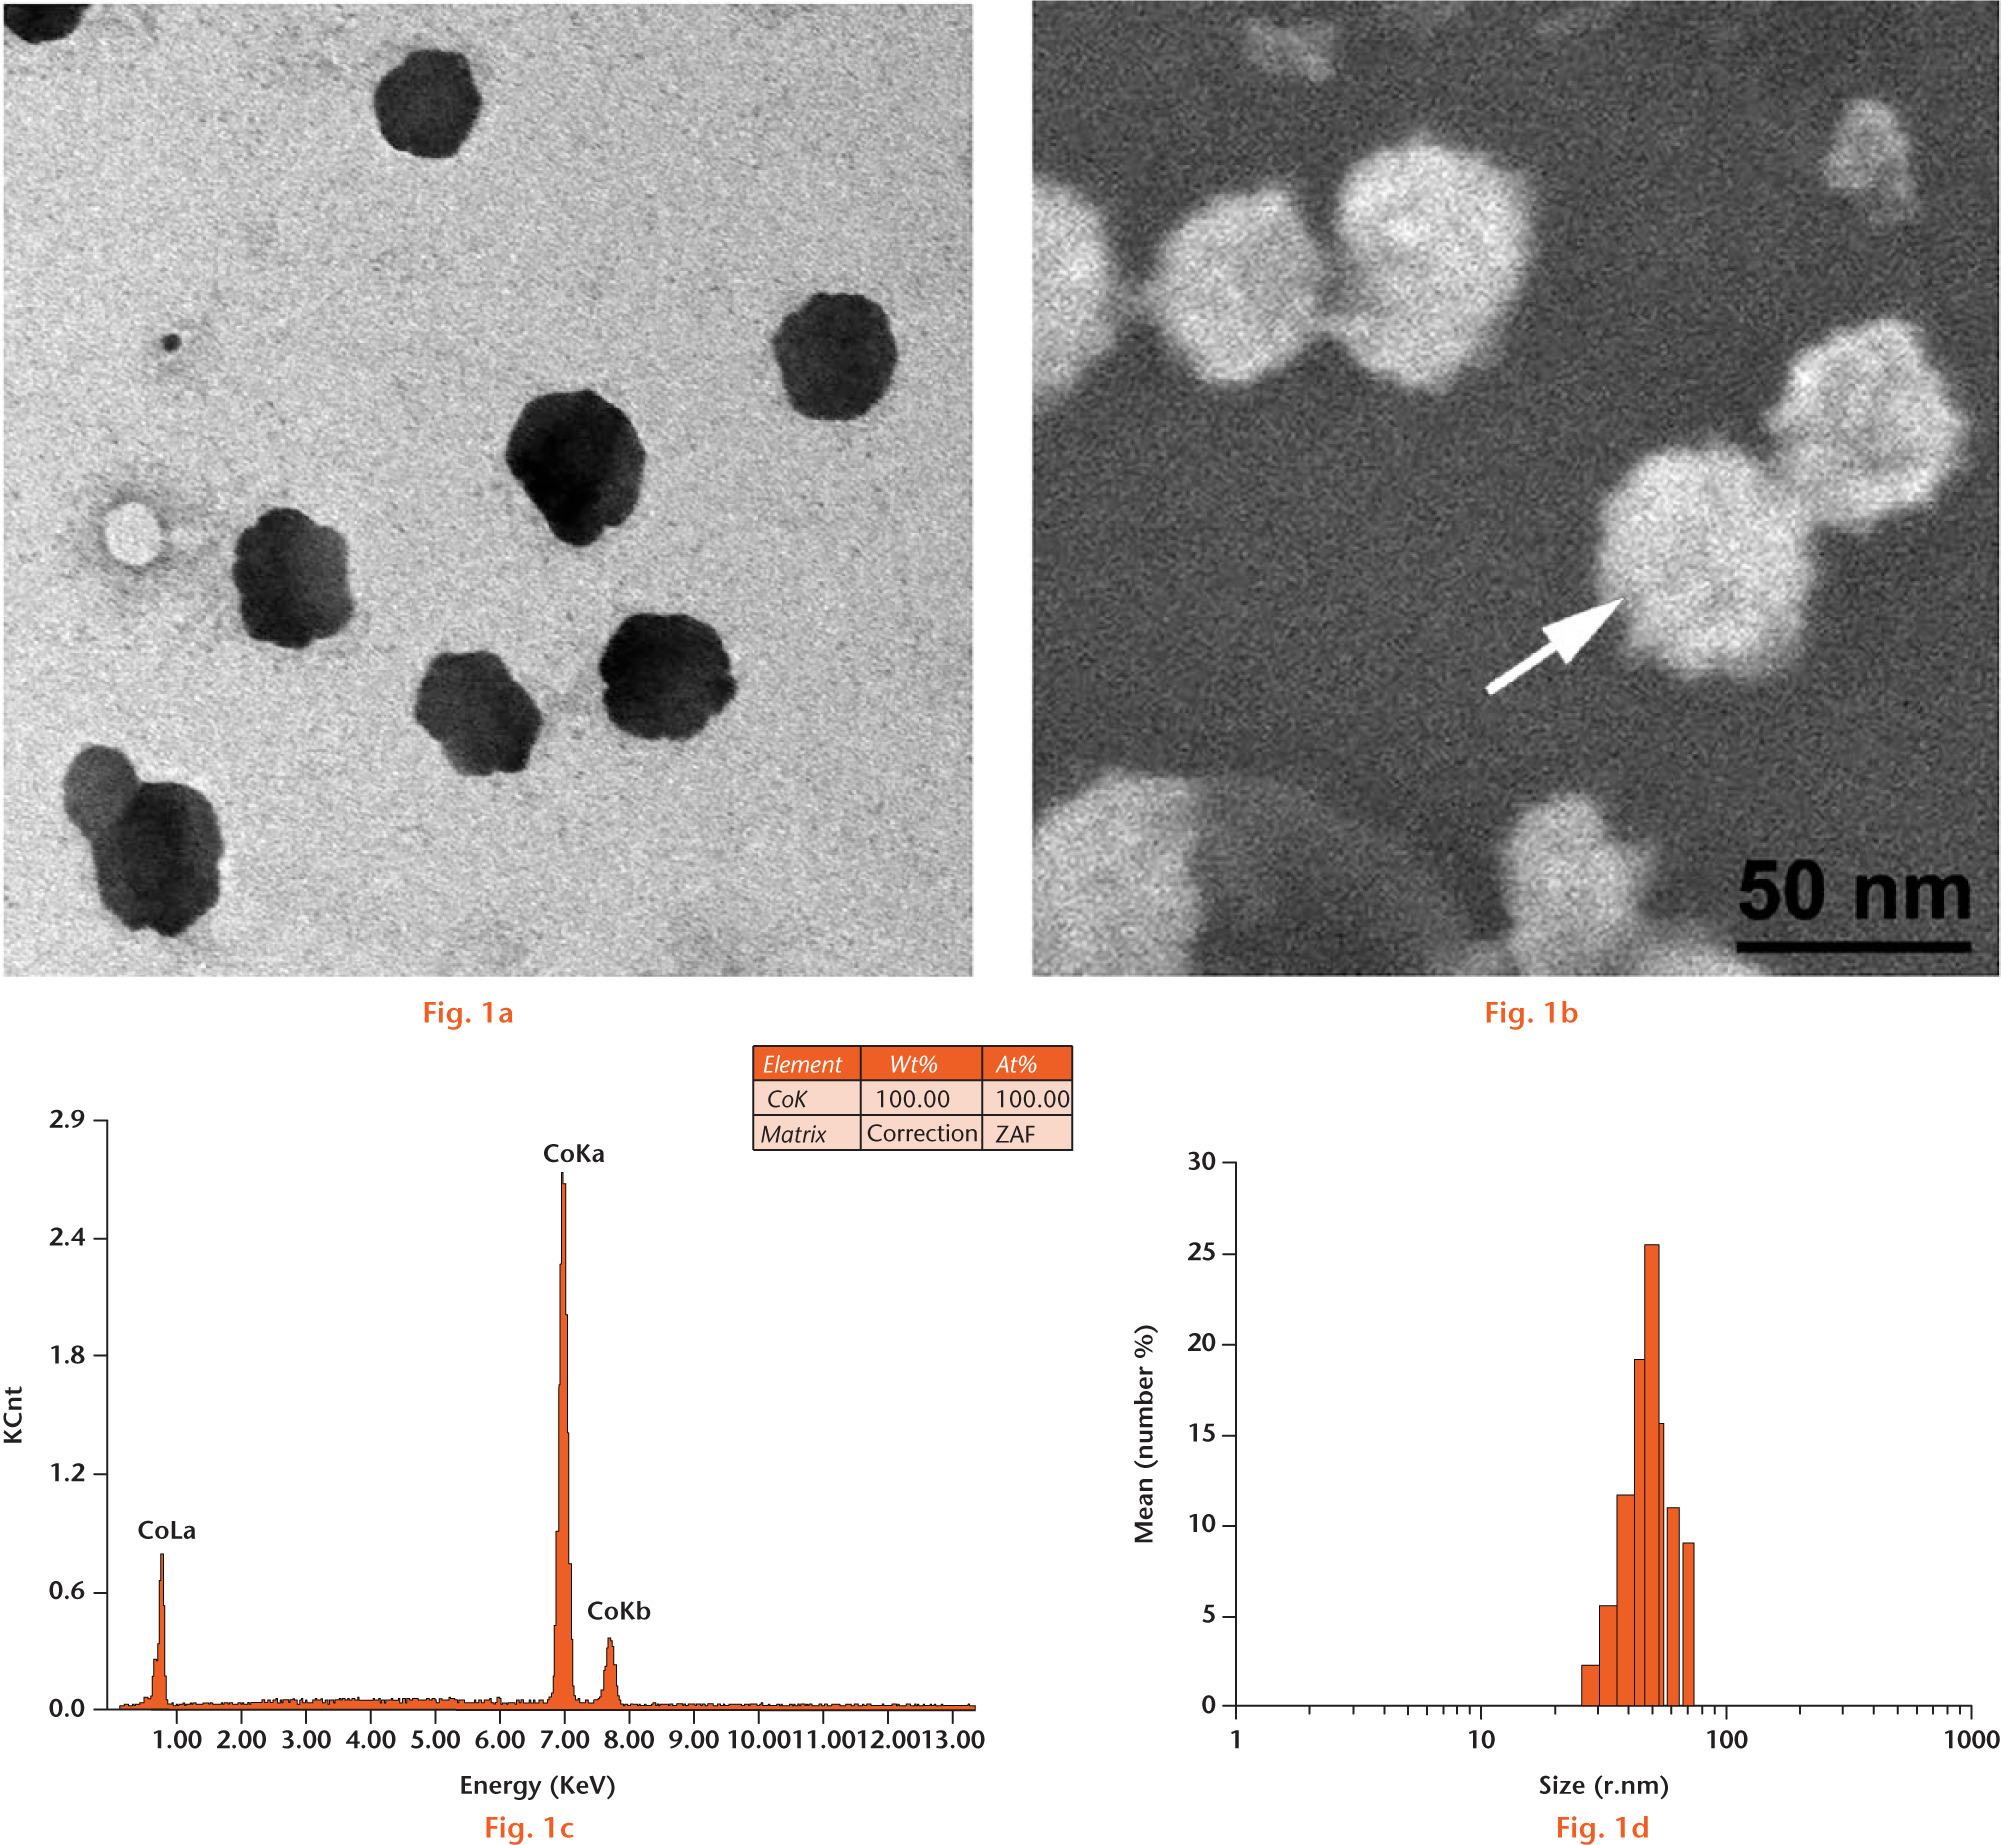 Fig. 1 
            Physicochemical properties of cobalt nanaparticles (Co-NPs). a) TEM micrograph of Co-NPs. Scale bar is 50 nm. b) SEM micrograph of Co-NPs. Scale bar is 50 nm. c) The EDS analysis of Co-NPs (the black arrow marker in b). d) Particle size distribution of Co-NPs.
          